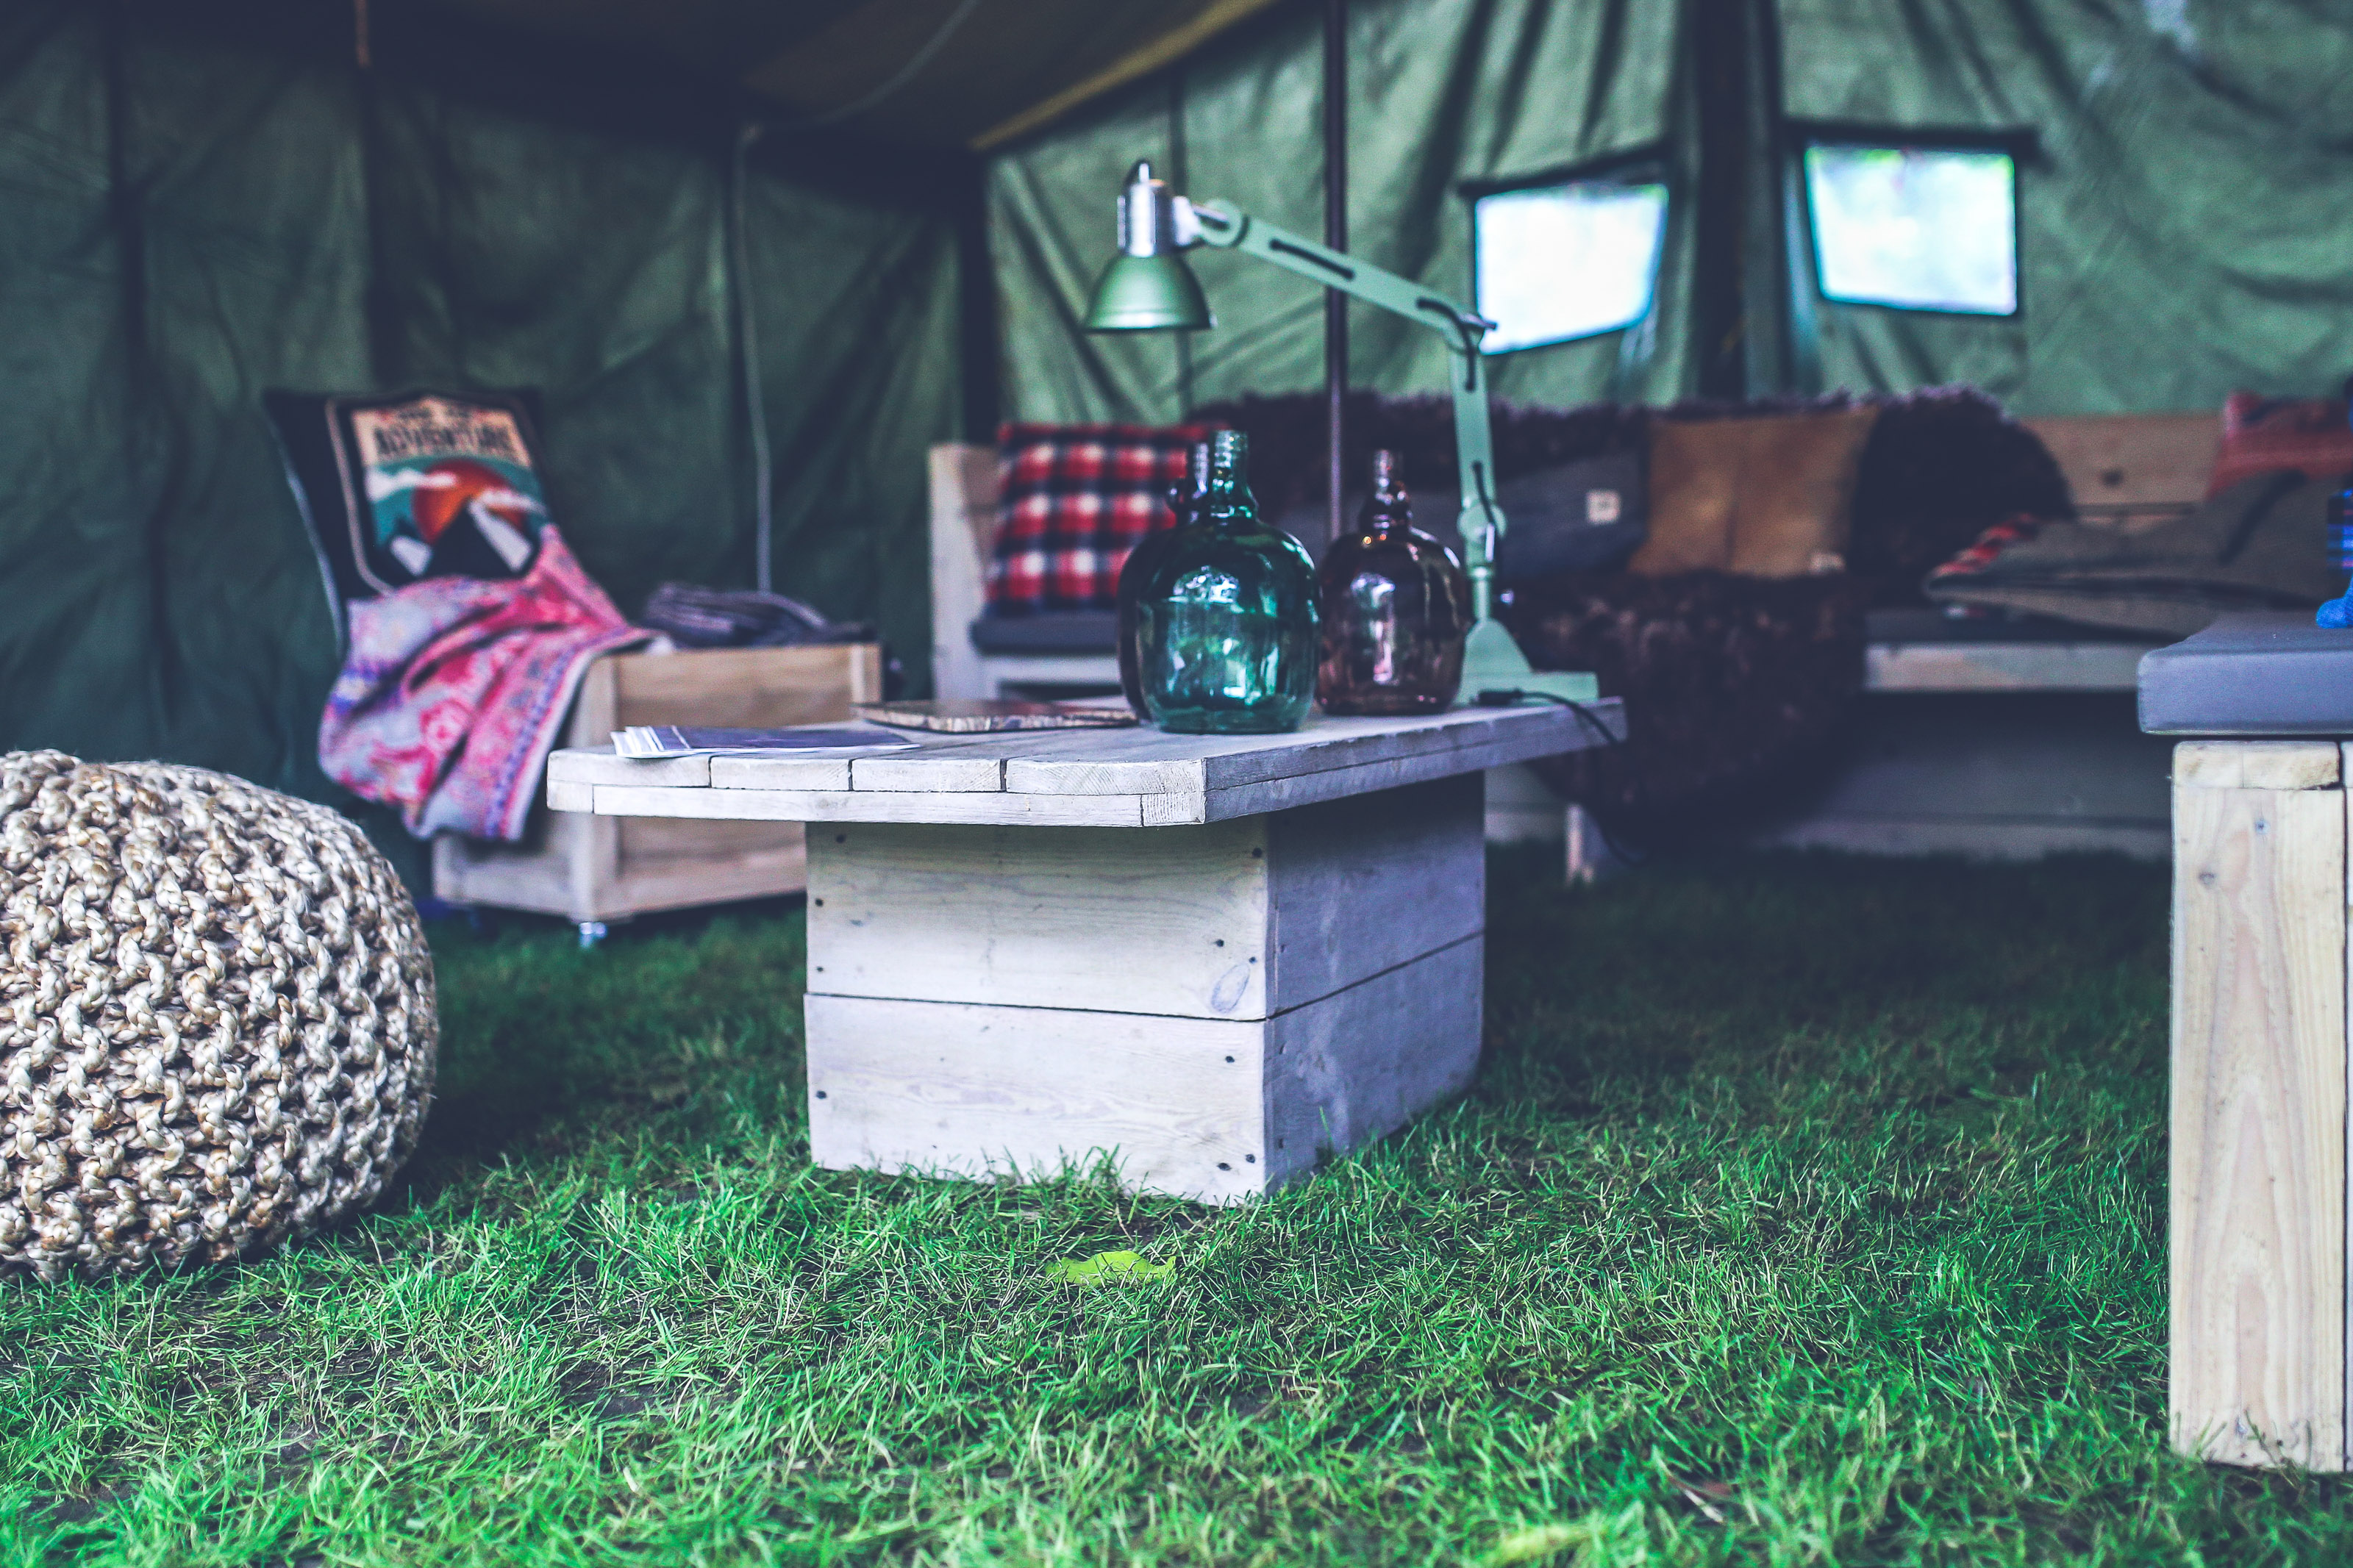 How to turn camping into Glamping